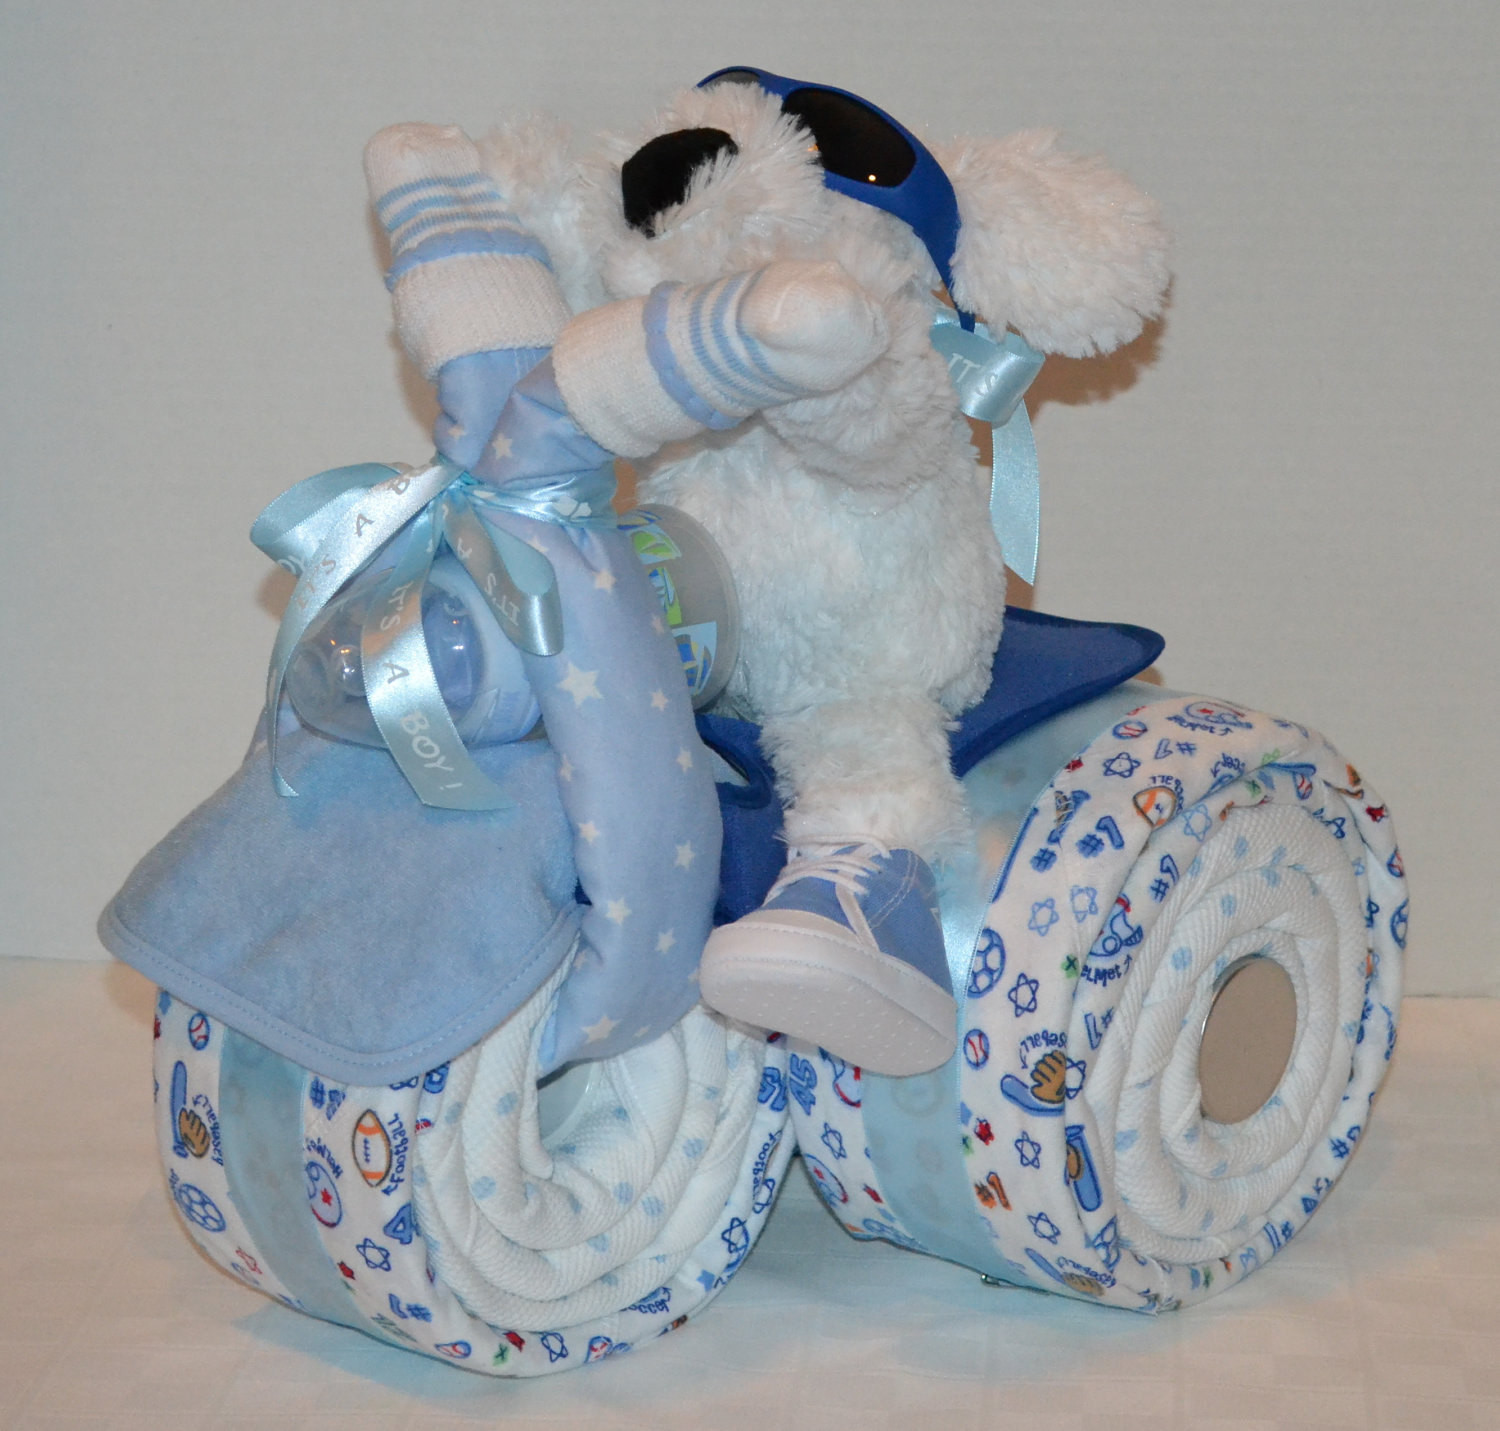 Baby Boy Shower Gift Ideas
 Tricycle Trike Diaper Cake Baby Shower Gift Sports theme